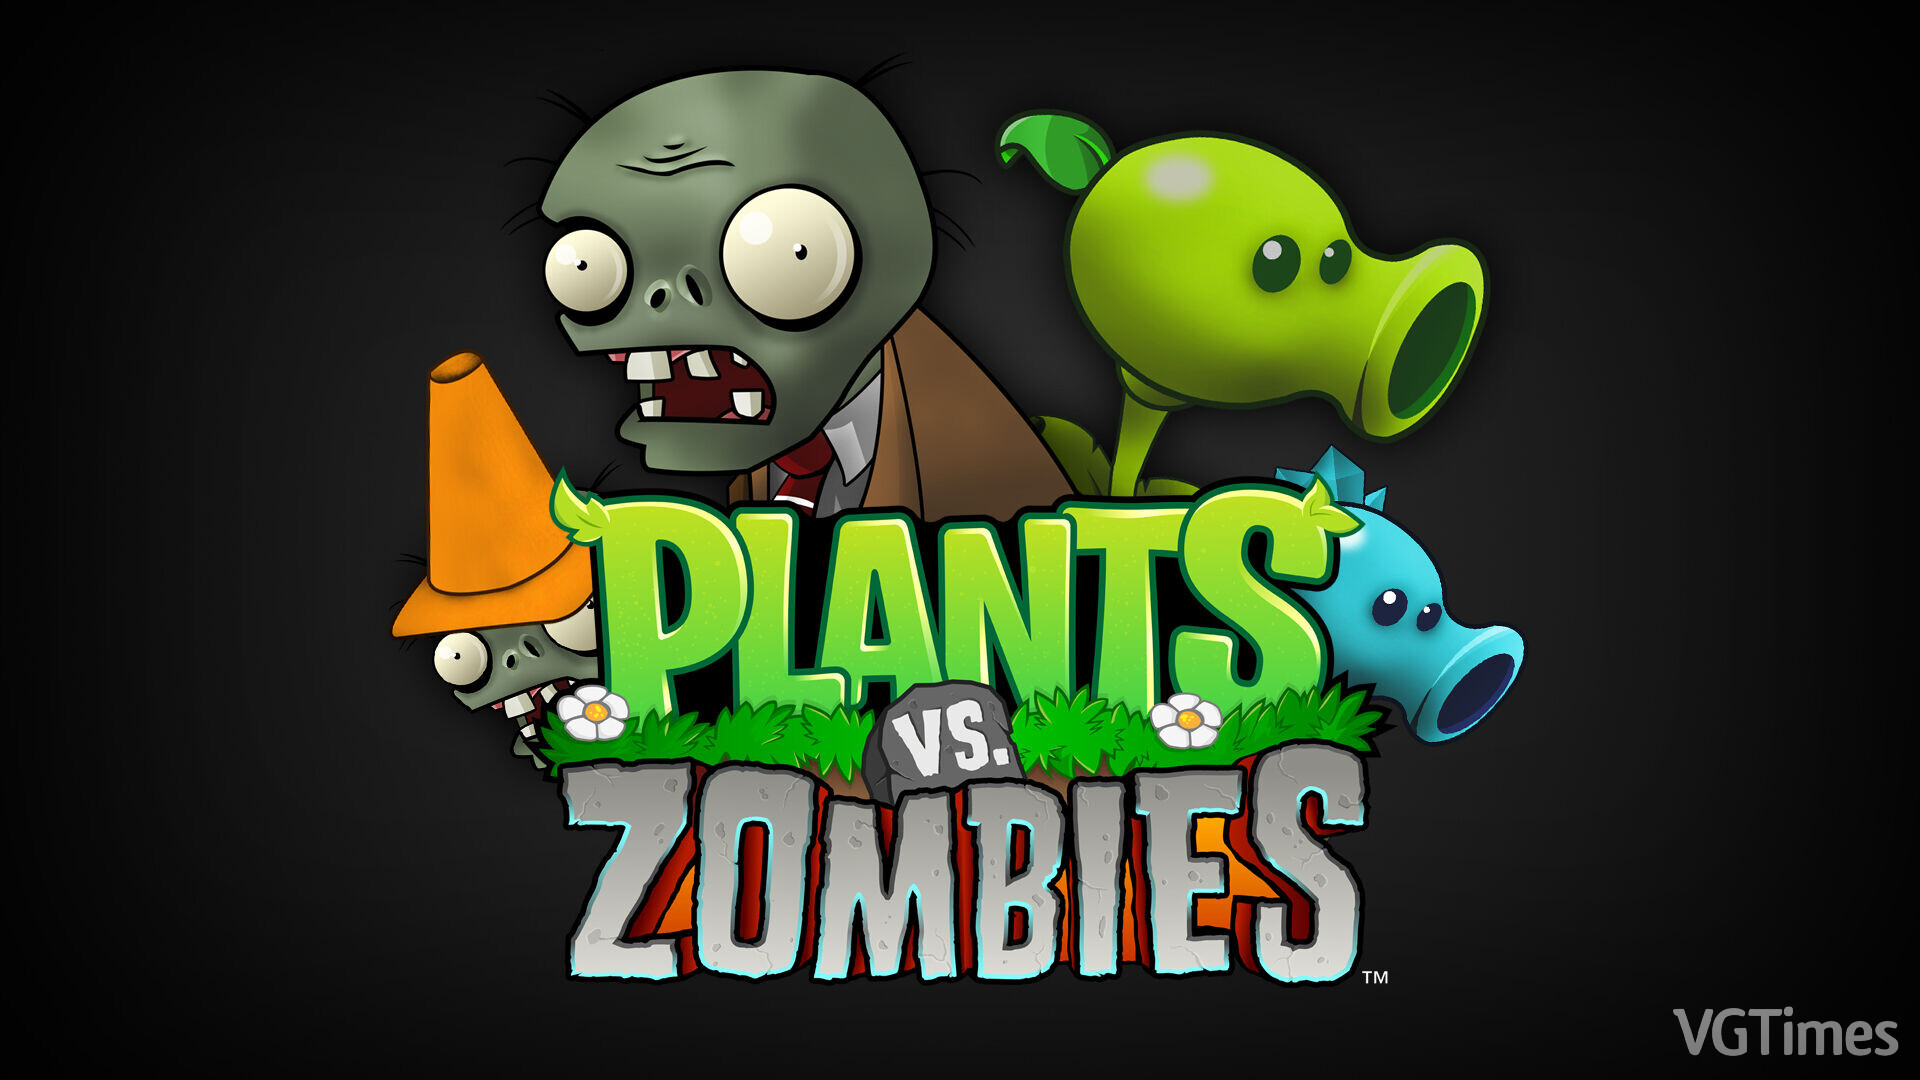 Plants vs zombies steam ages фото 56